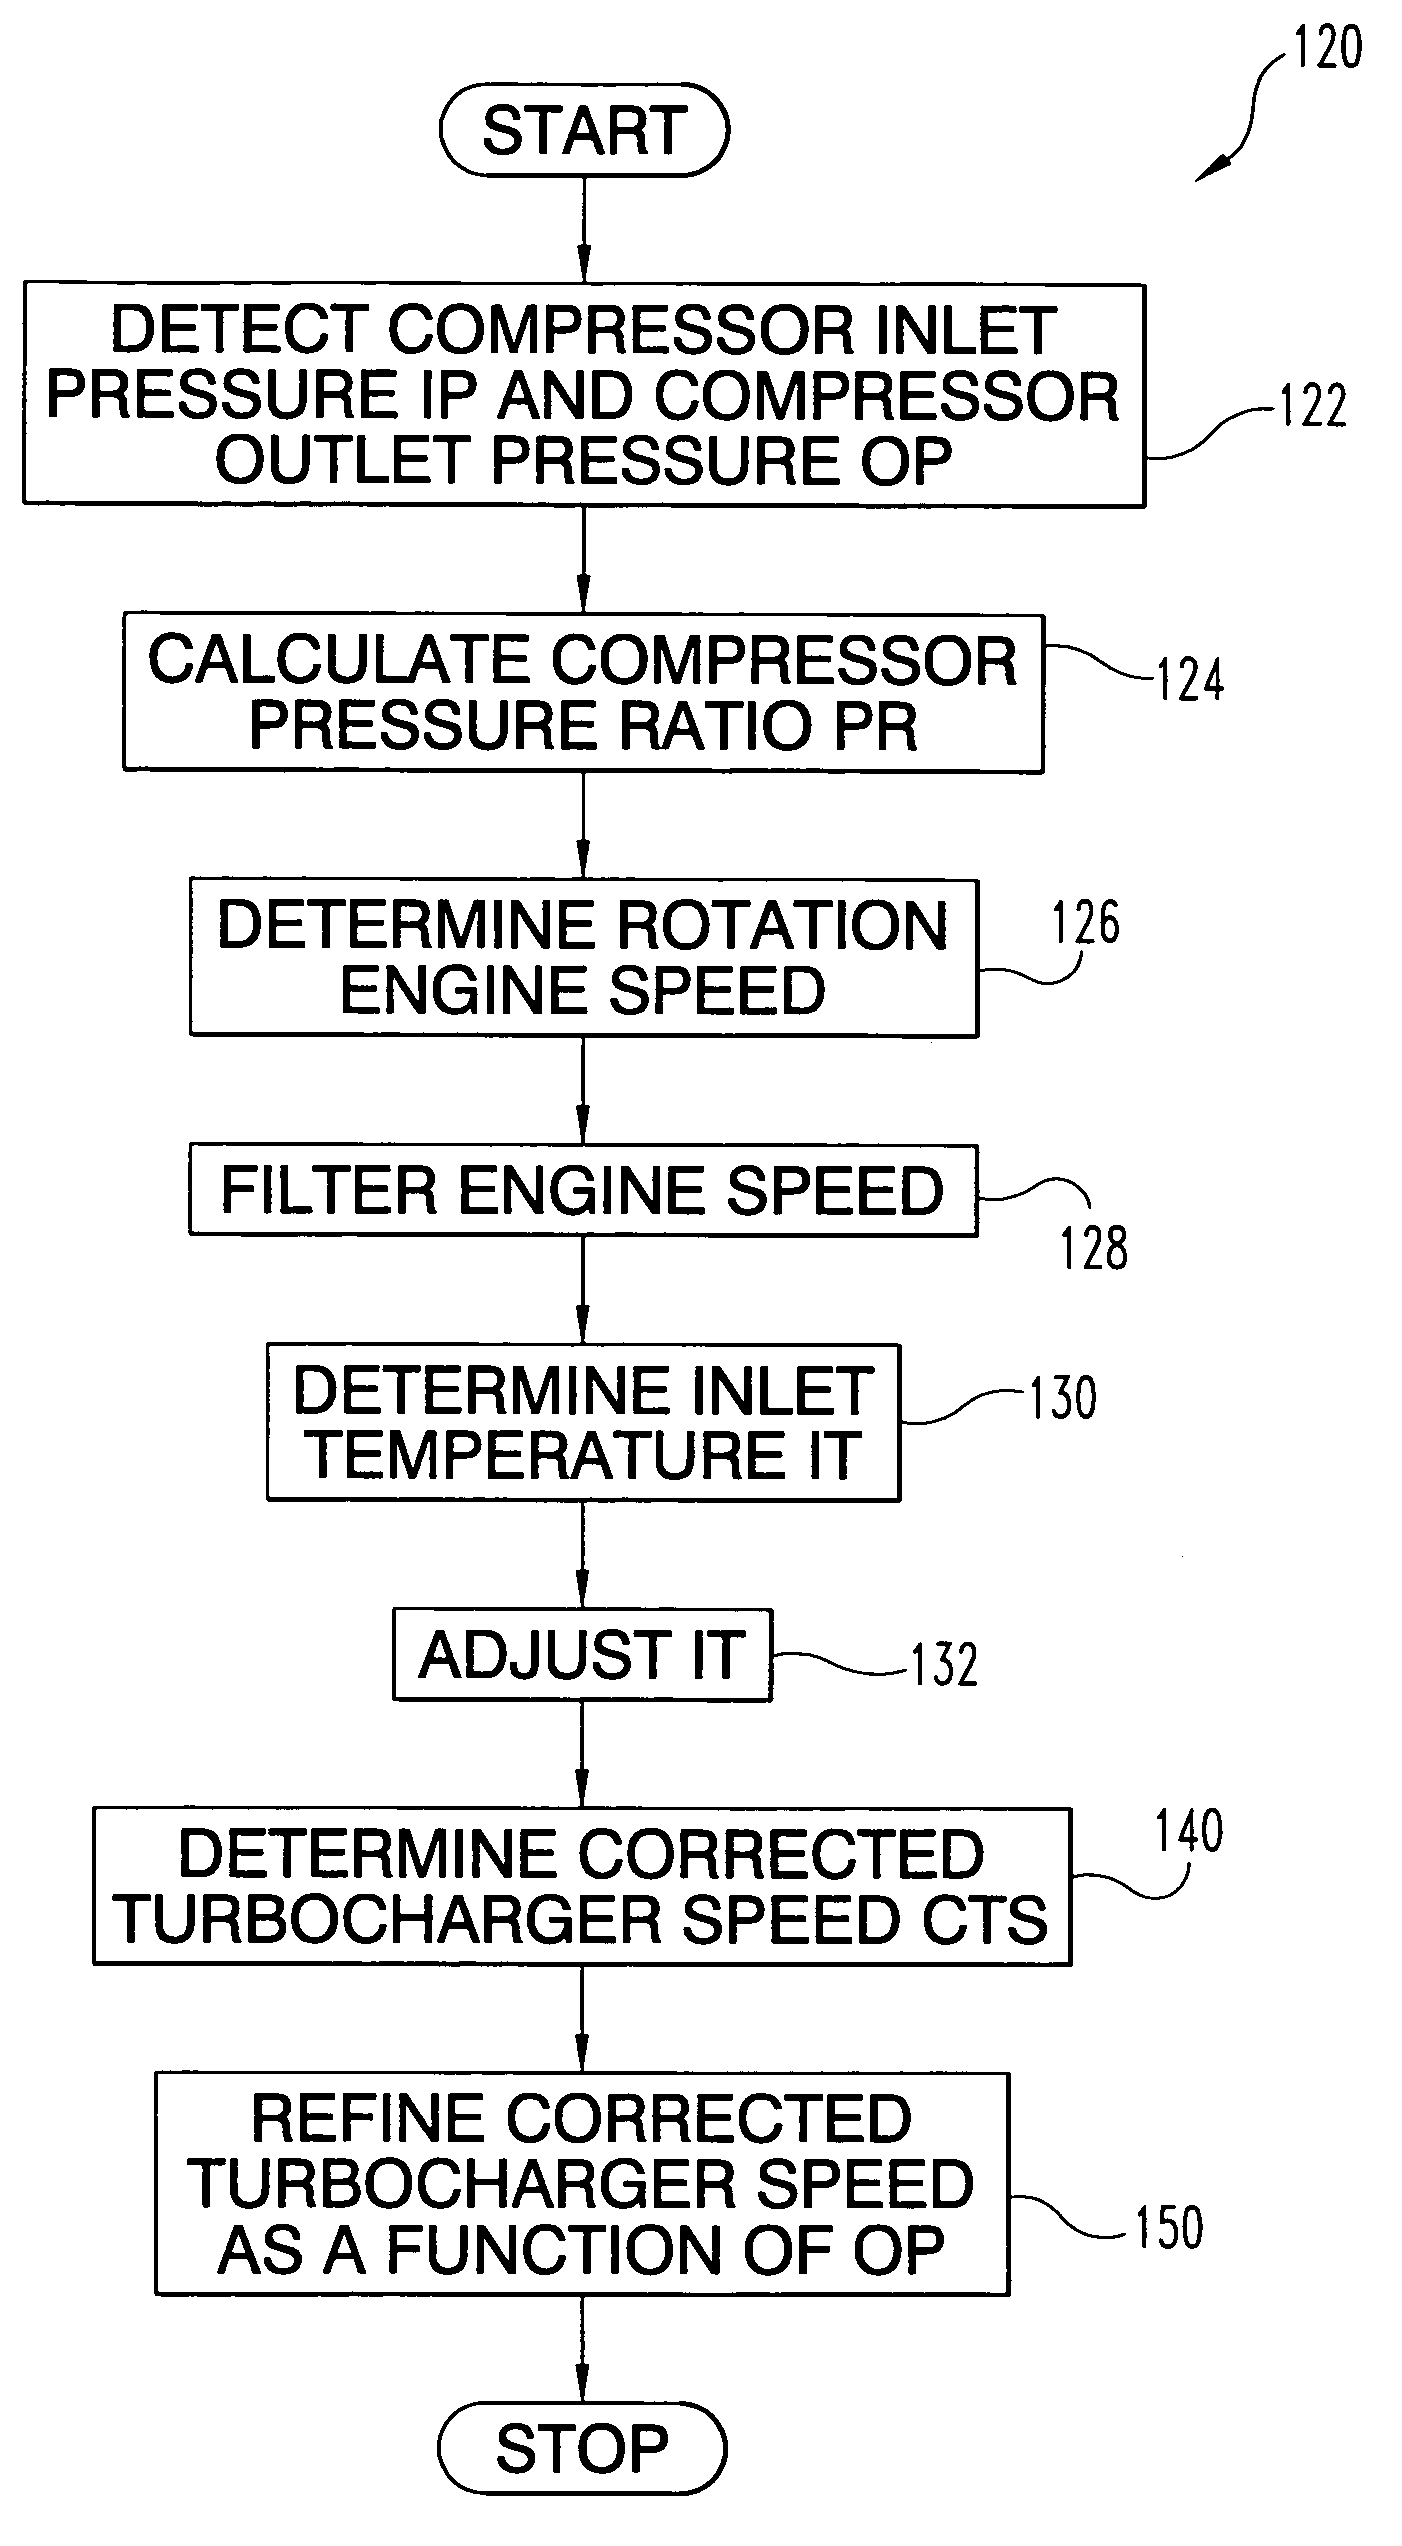 Techniques for determining turbocharger speed